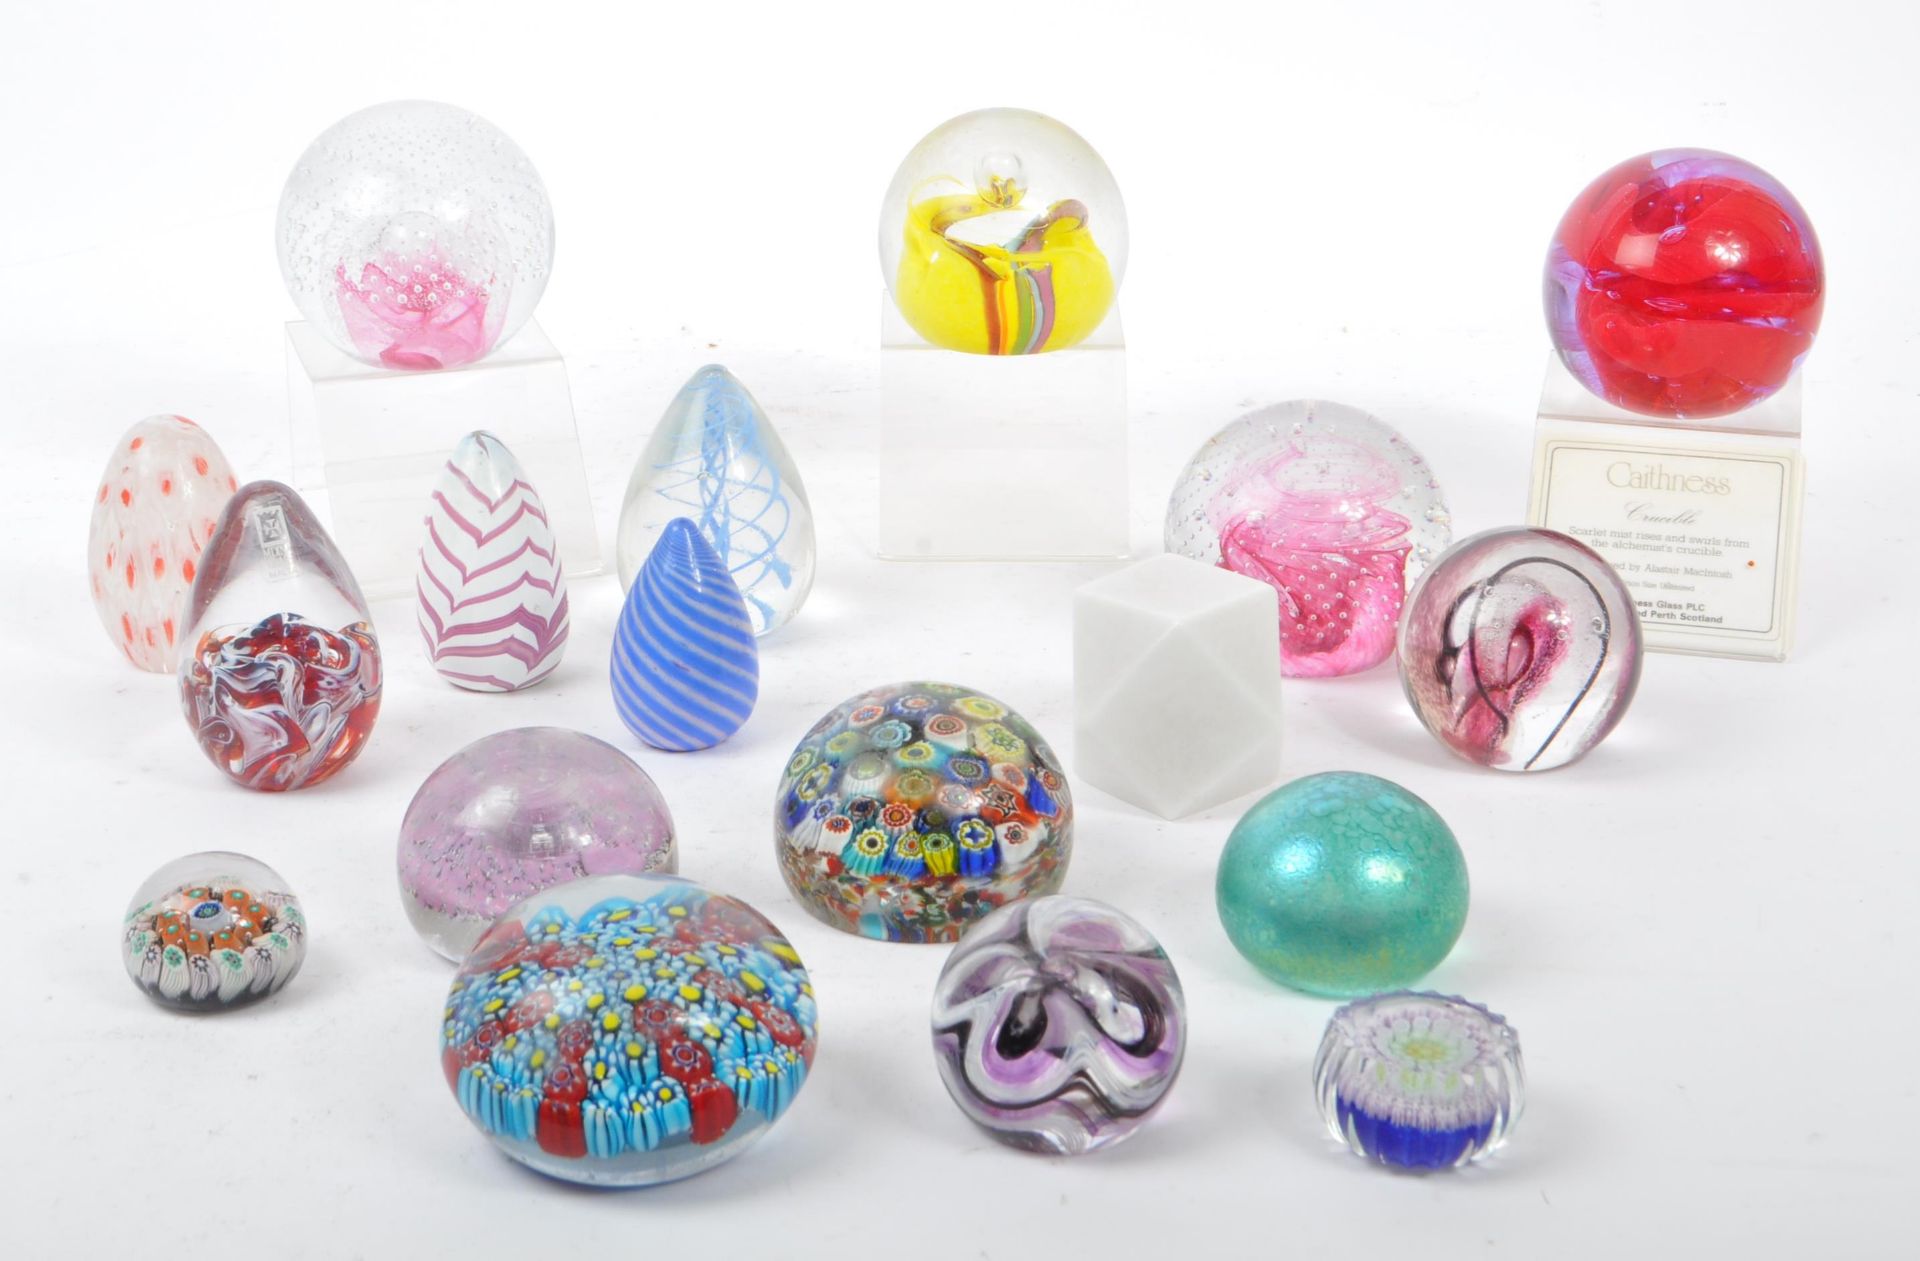 A COLLECTION OF VINTAGE PAPERWEIGHTS - CAITHNESS